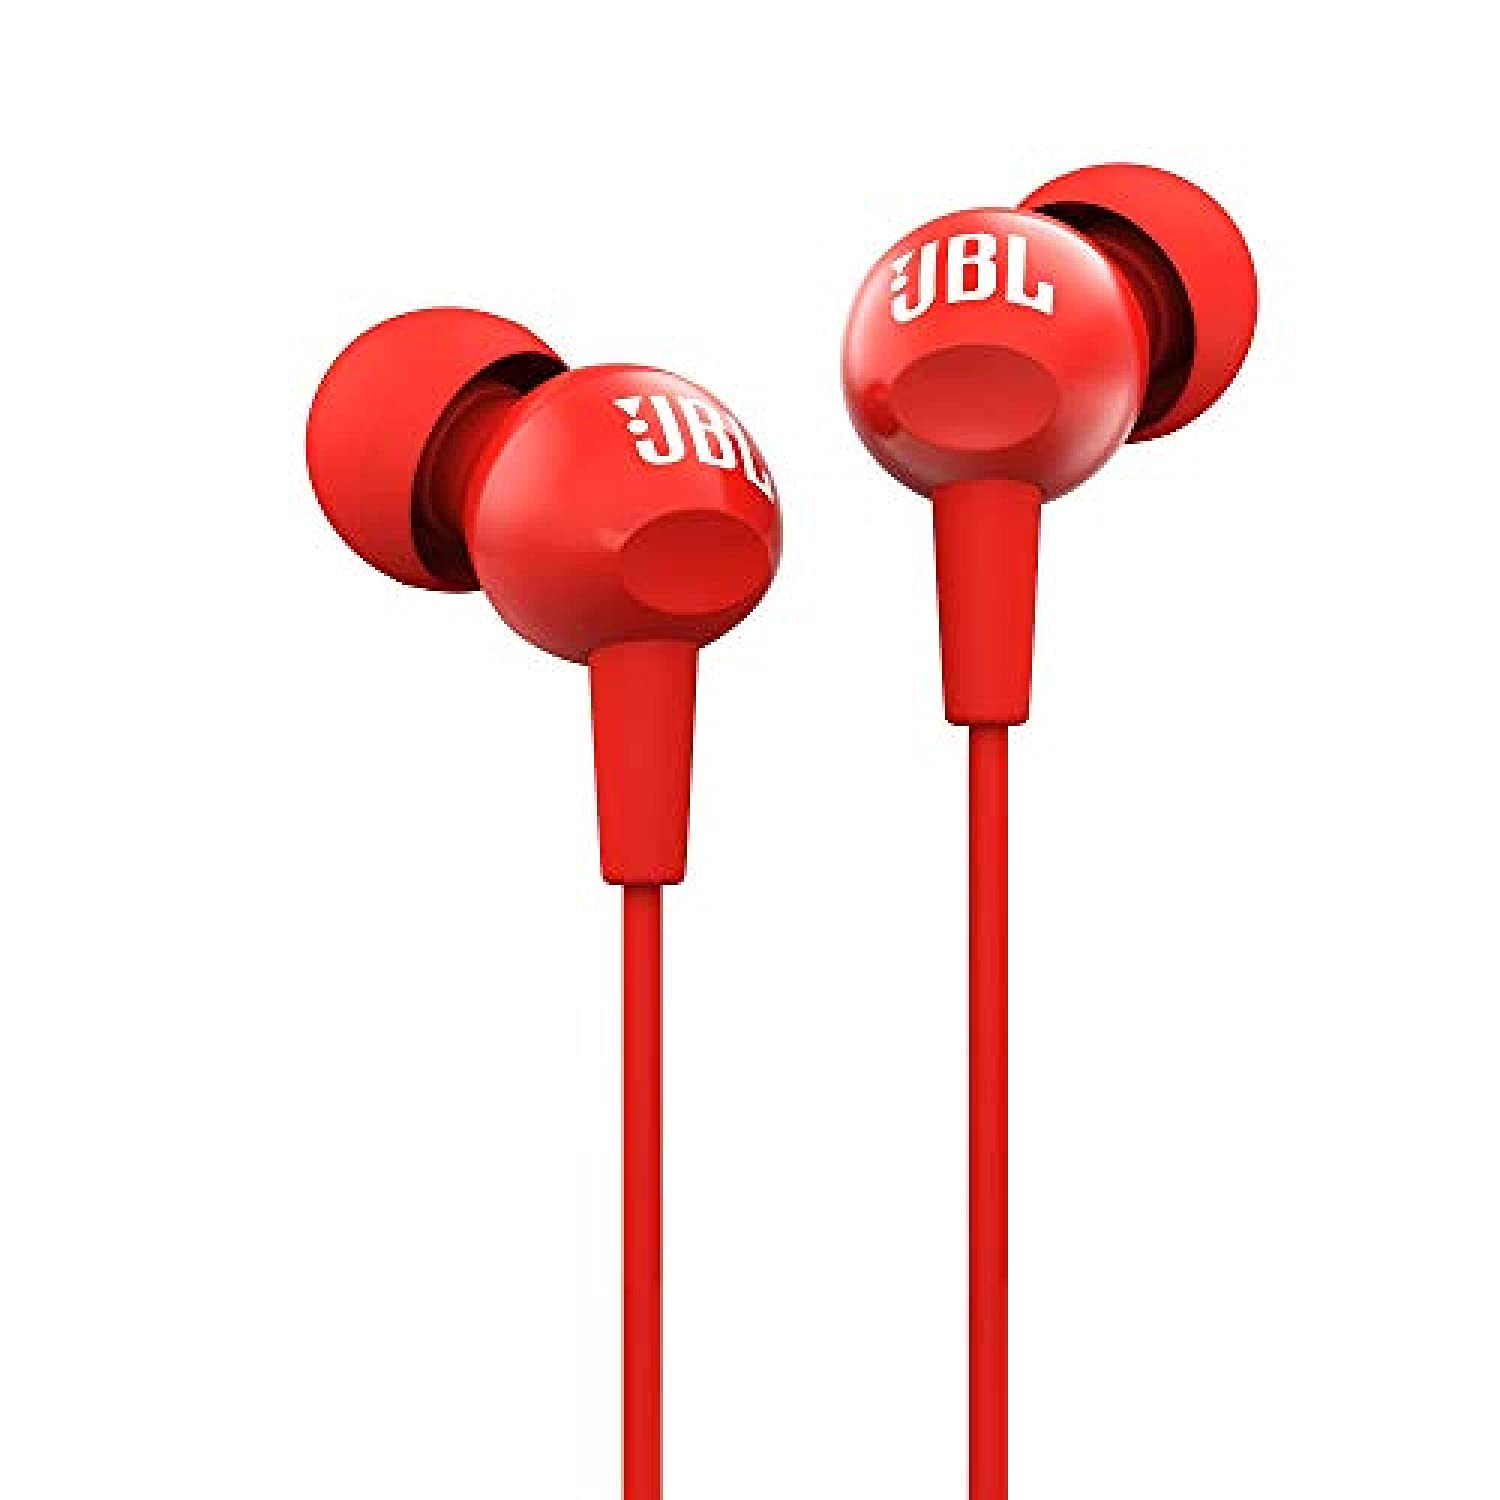 Open Box, Unused JBL C100SI In-Ear Headphones with Mic Red Pack of 10